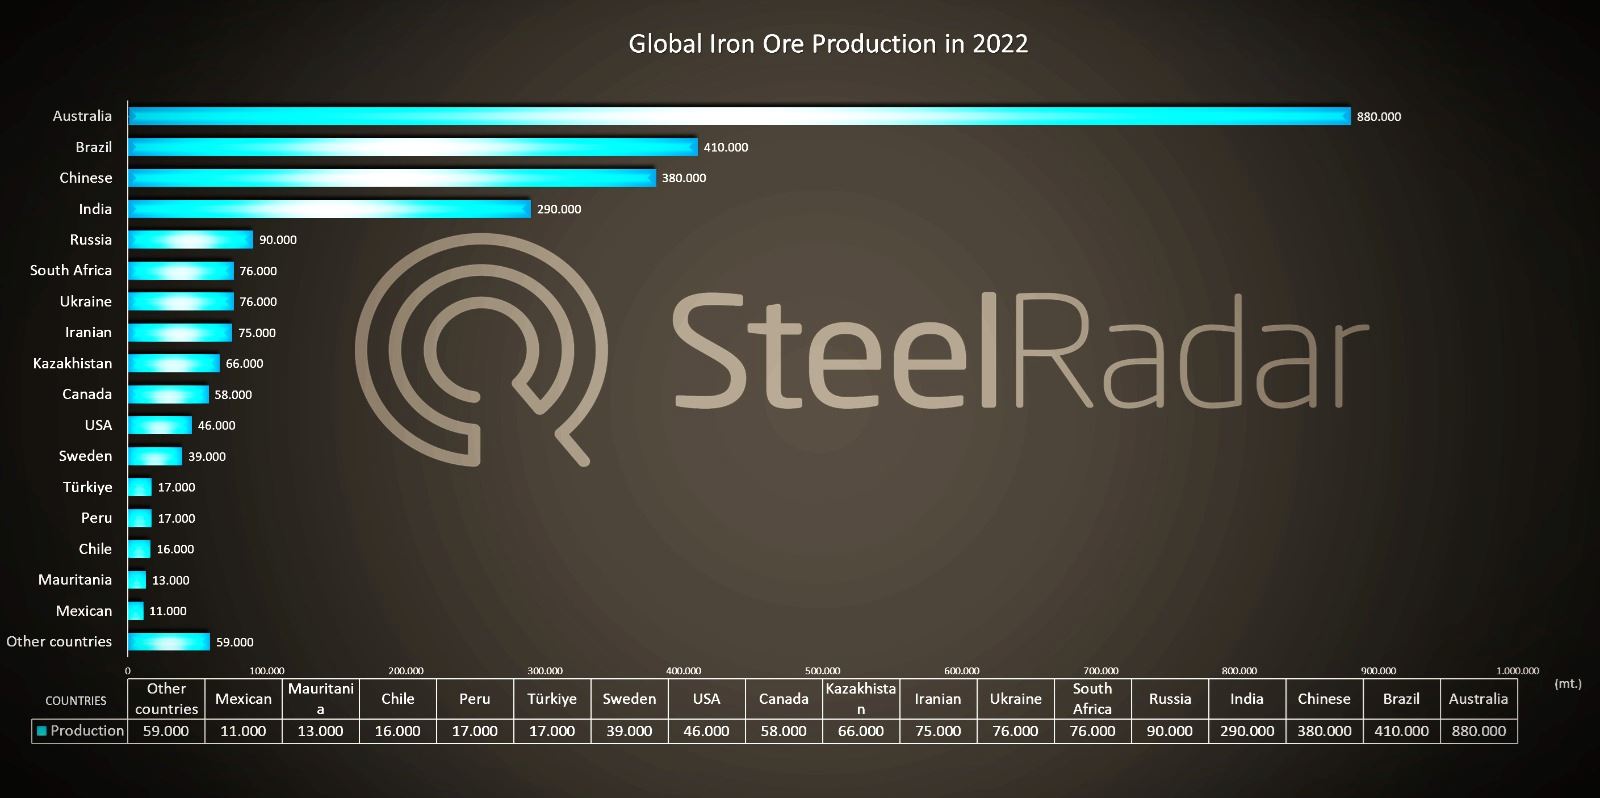 Australia is again the iron ore champion in the global market in 2022